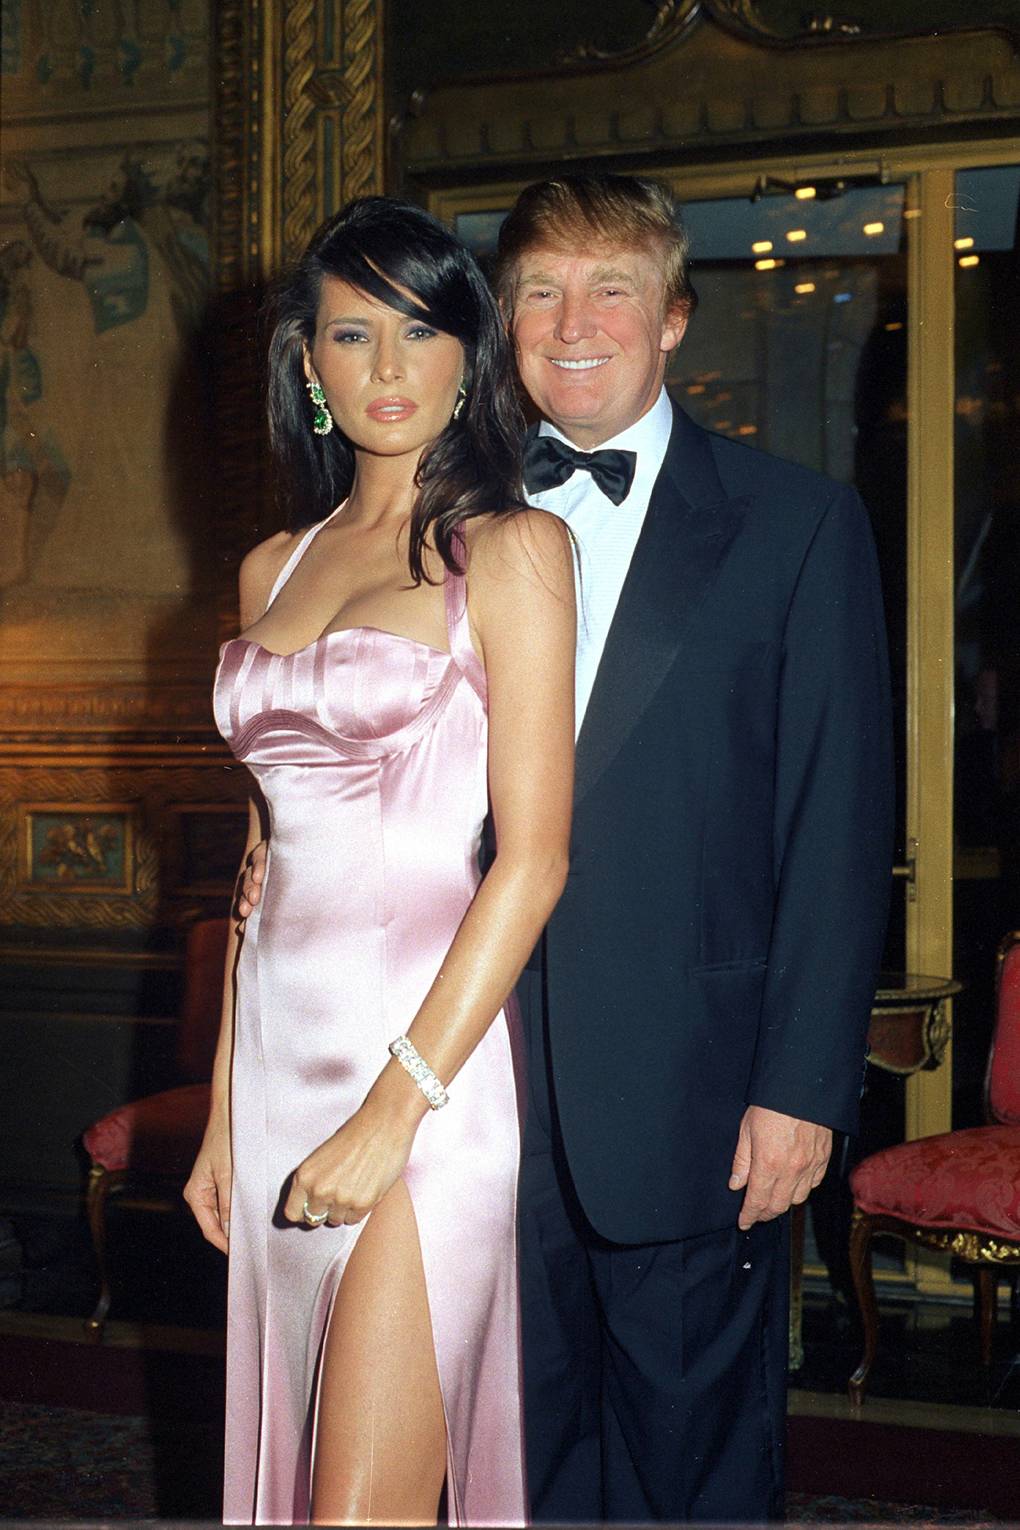 From The 05 Archives An Interview With Newlywed Melania Trump On Donald The Wedding Their Meeting And Life In Trump Towers Tatler